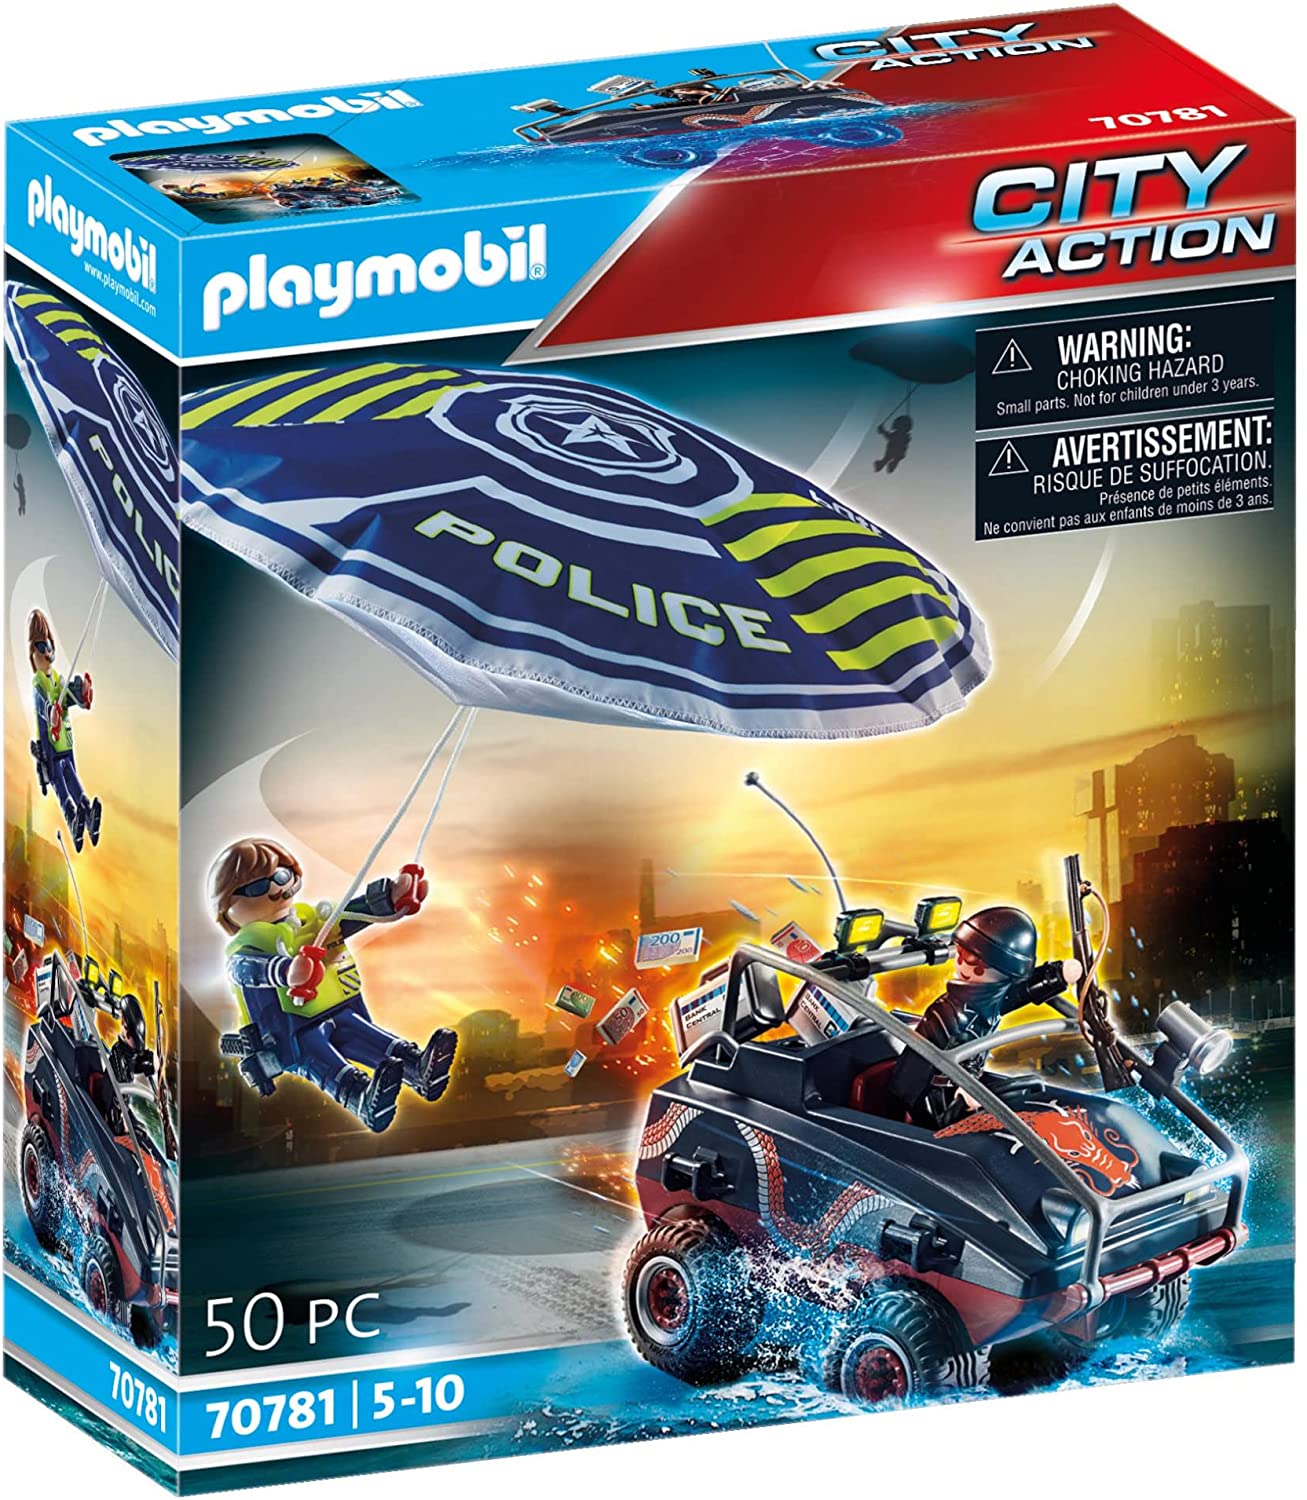 Playmobil City Action Tactical Police all Terrain Vehicle 71144 • Price »